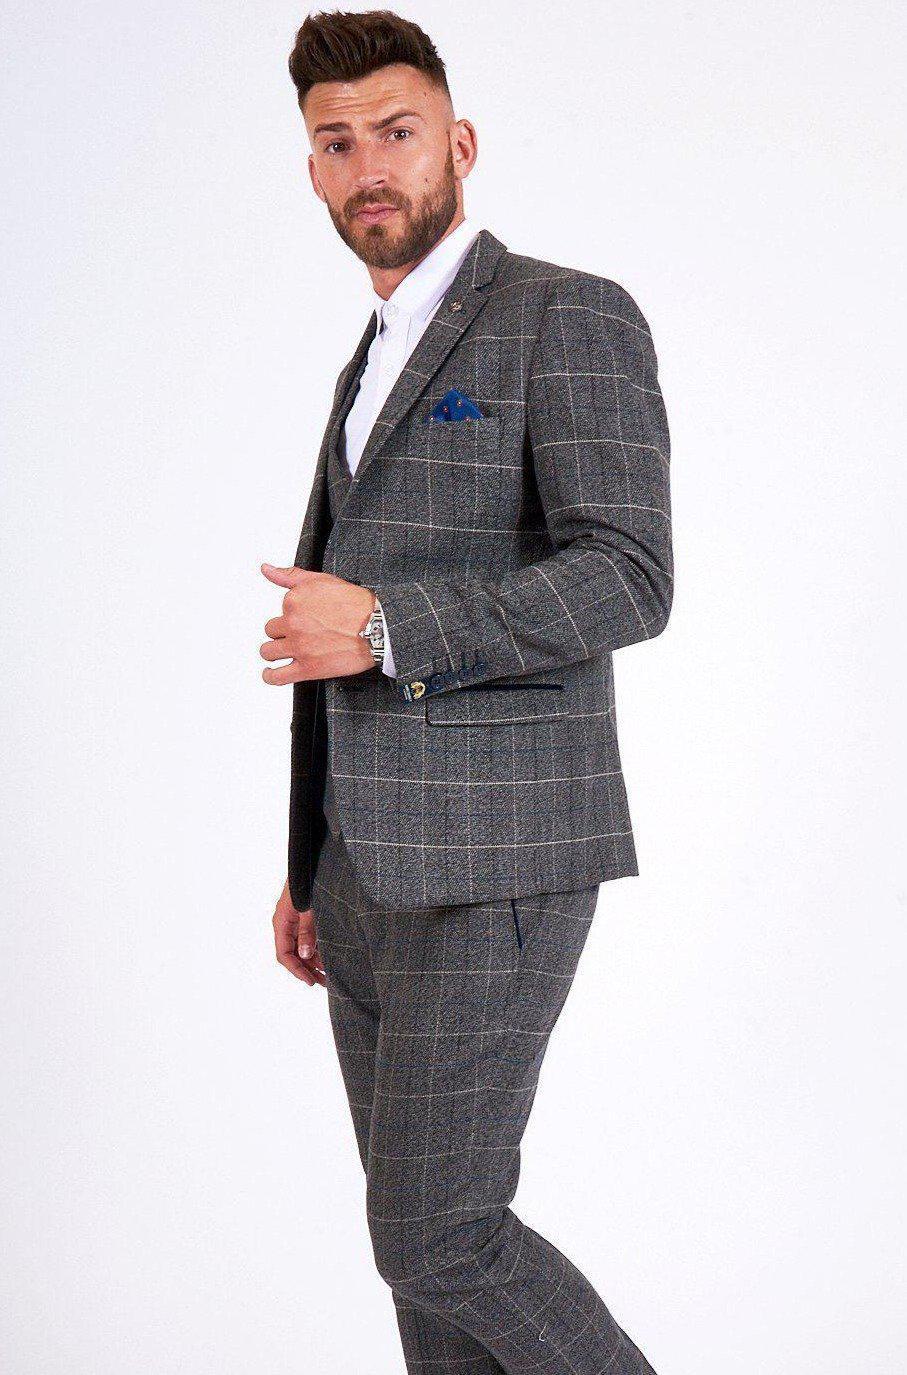 Men's Suits | Stylish, Tailored Suits for Men | Marc Darcy